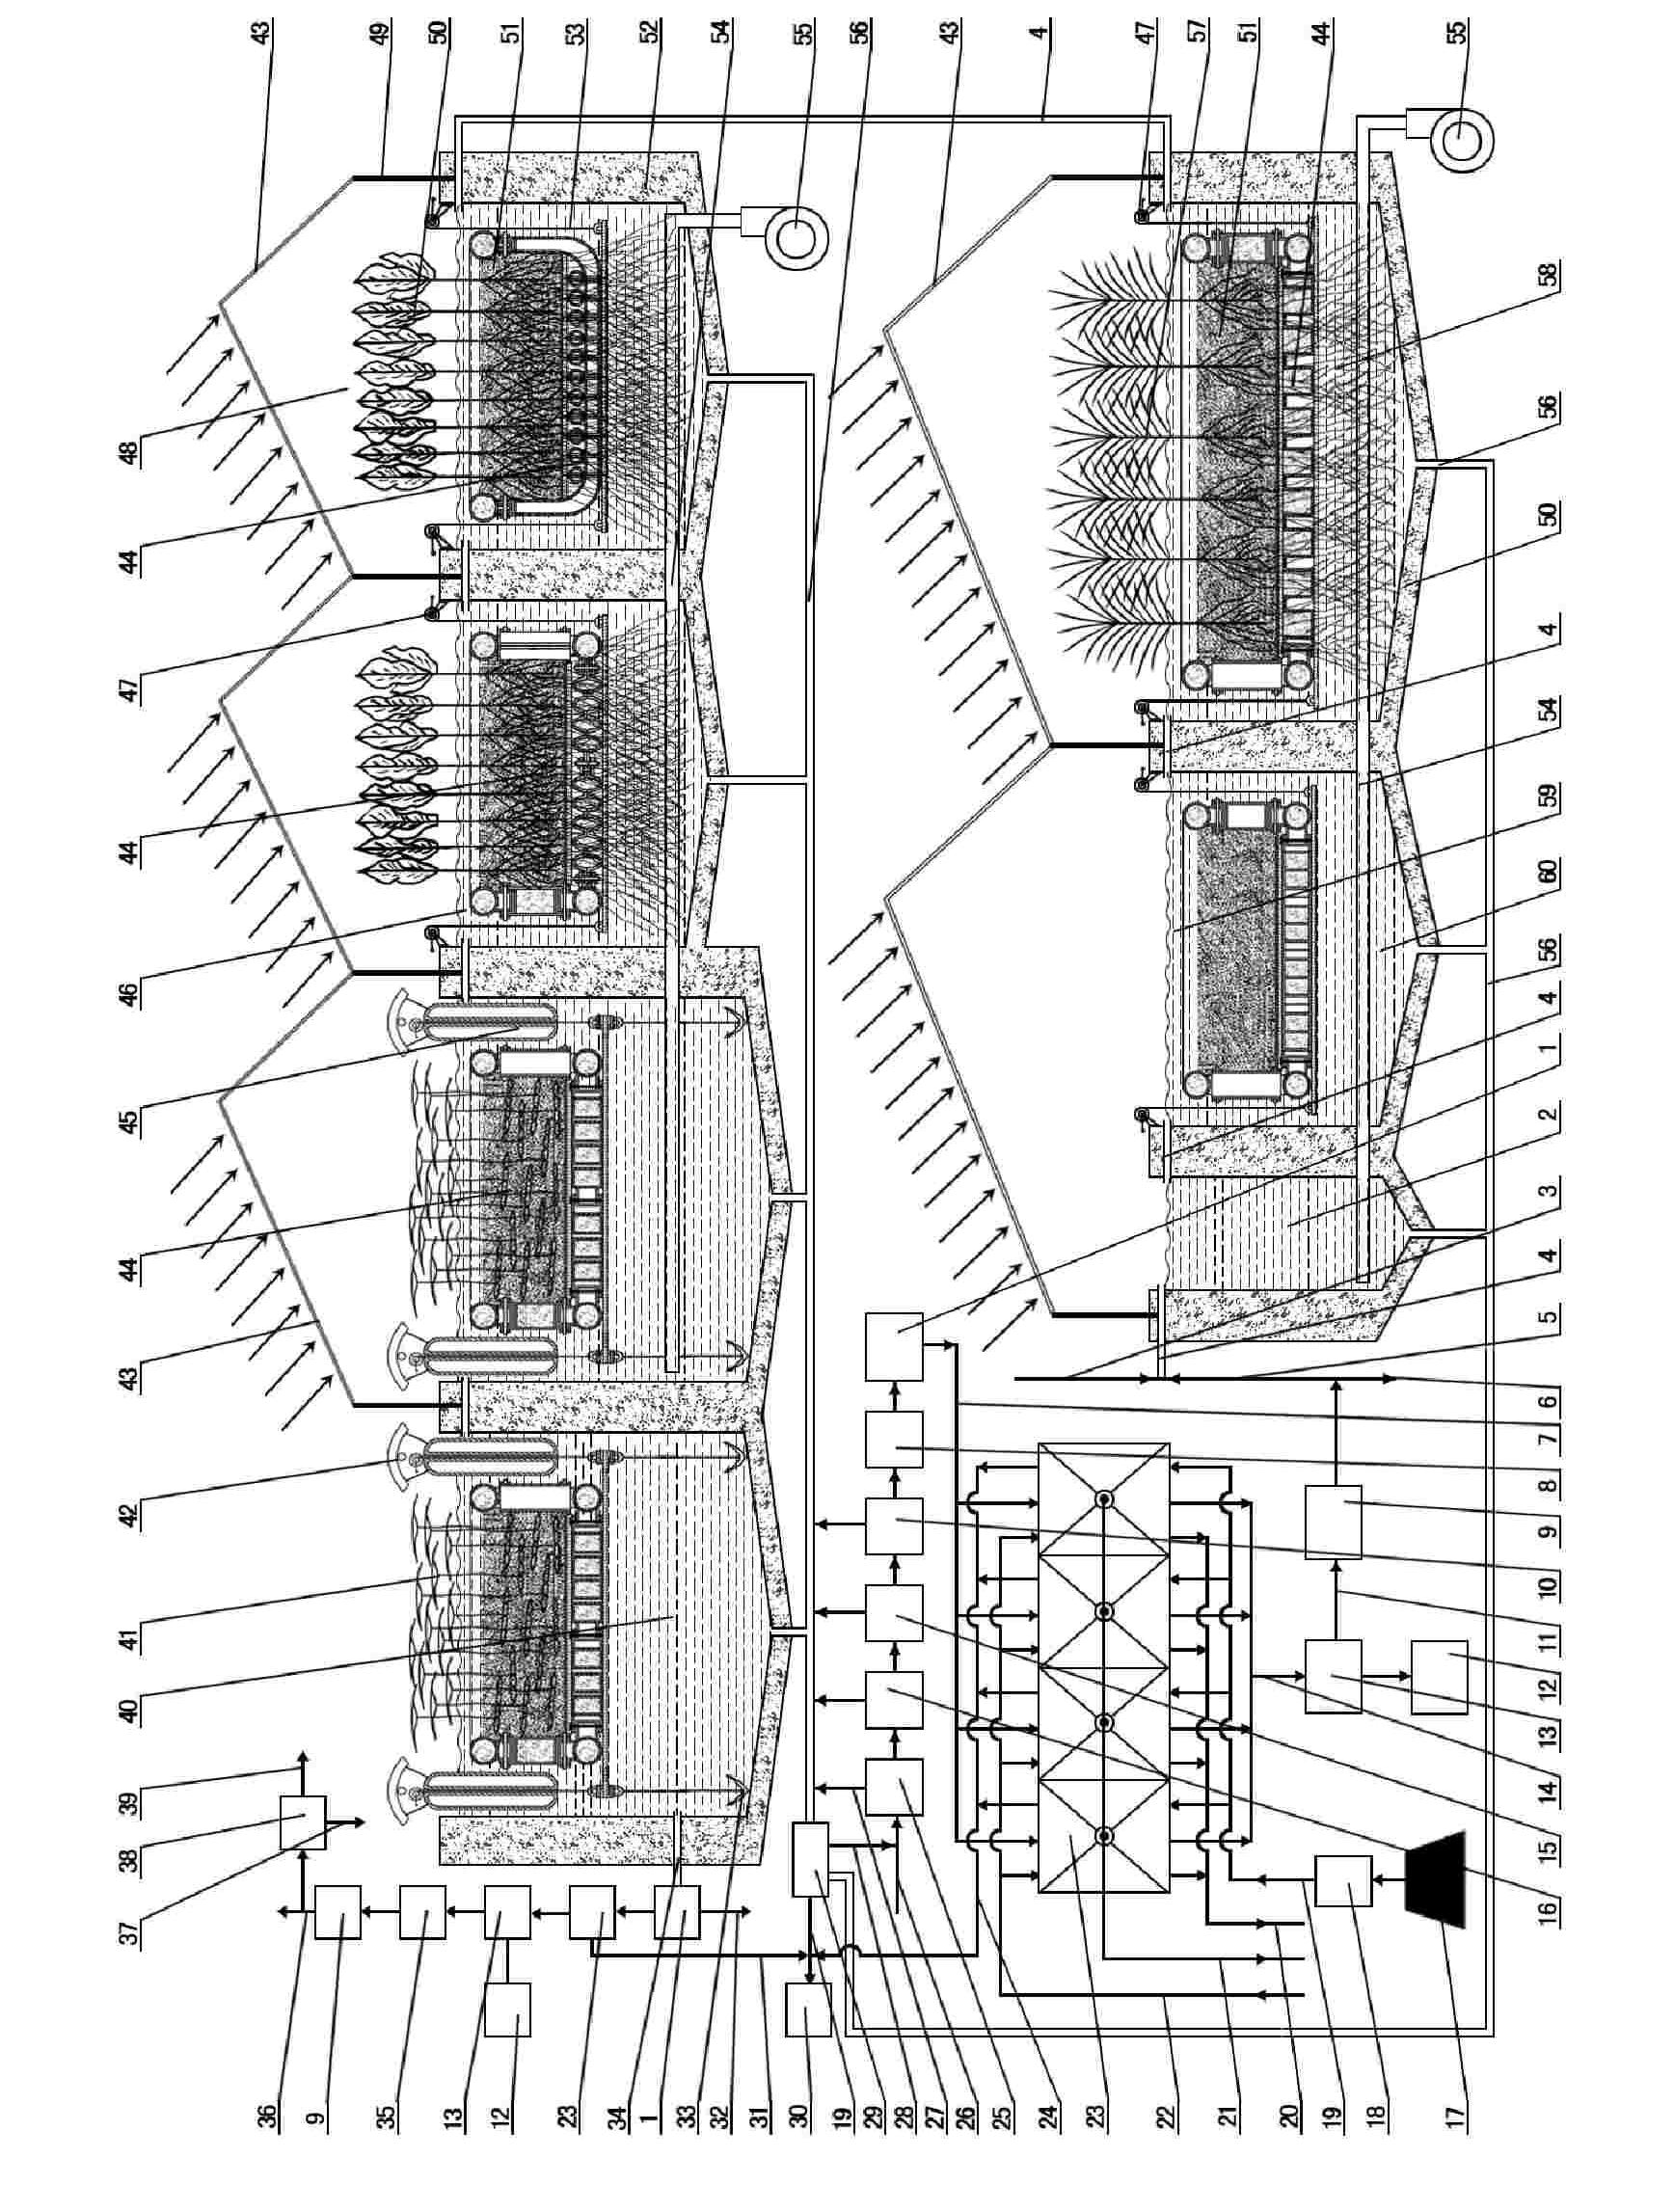 Filter-adsorption-submerged floating wet land sewage treating system and apparatus